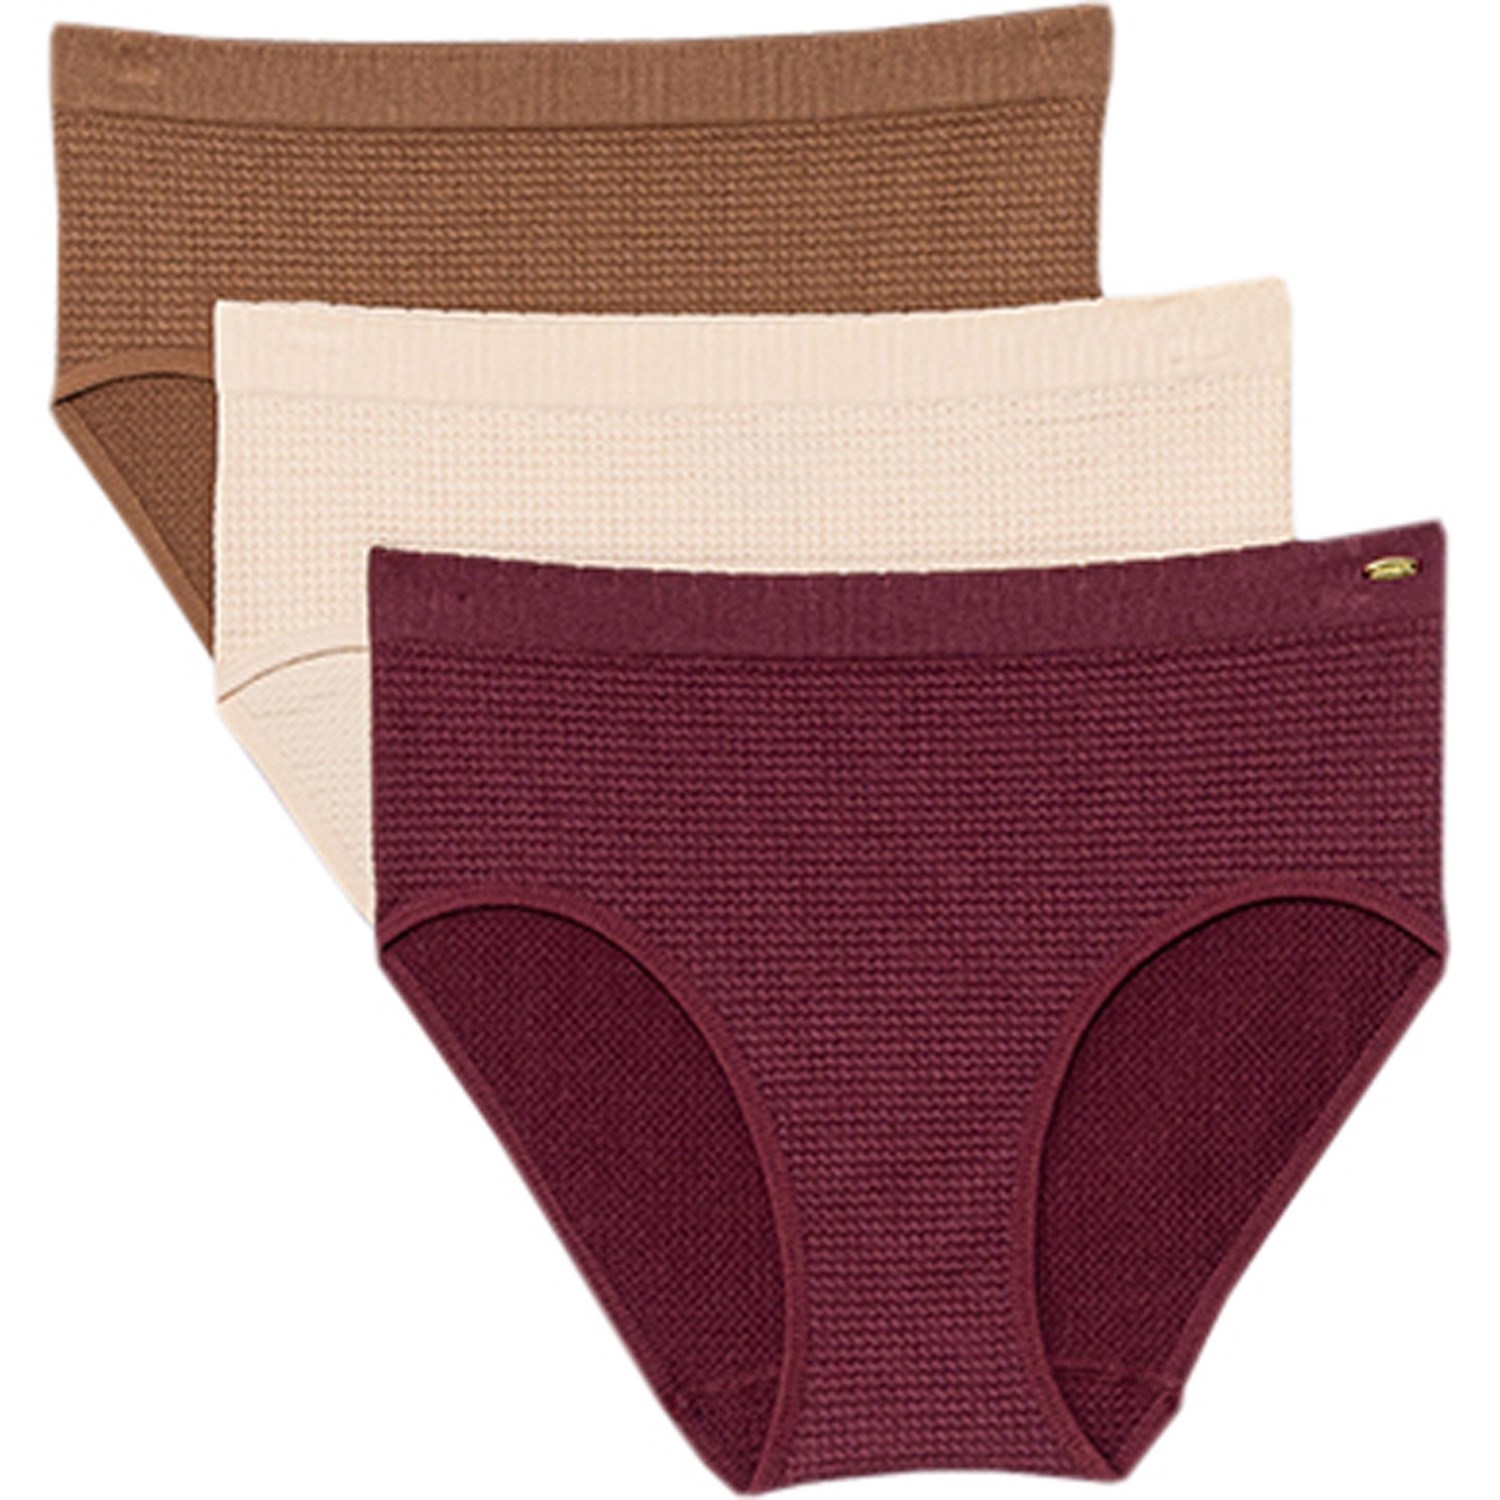 CAPEZIO Tuck Stitch Waffle-Knit Panties - 3-Pack, Brief - Save 50%